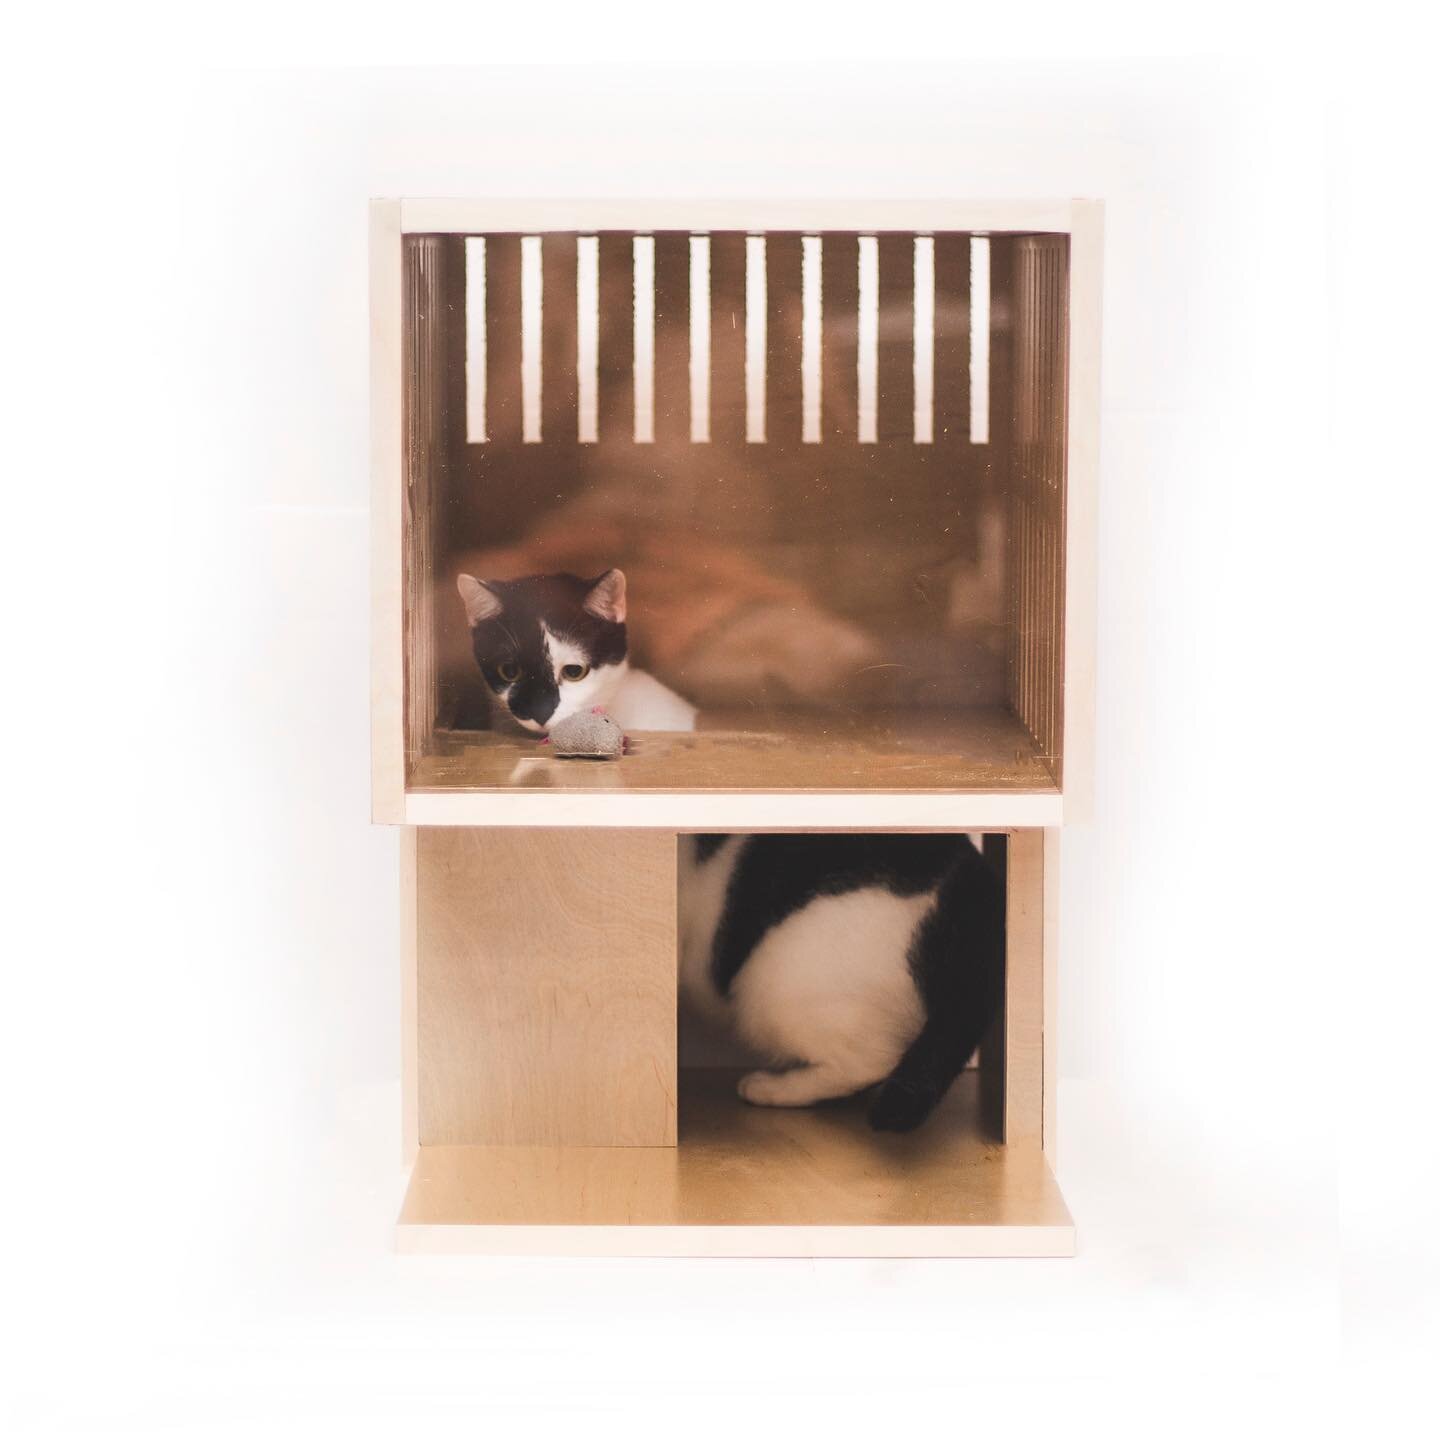 The loft has two floors and the perfect size for most domestic cats, it also makes a perfect nightstand or side table. 

#cats #catsofinstagram #catstagram #purrtacular #ilovemycats #catoftheday #lovecats #cutecats #instacats #instagood #kittenlove #